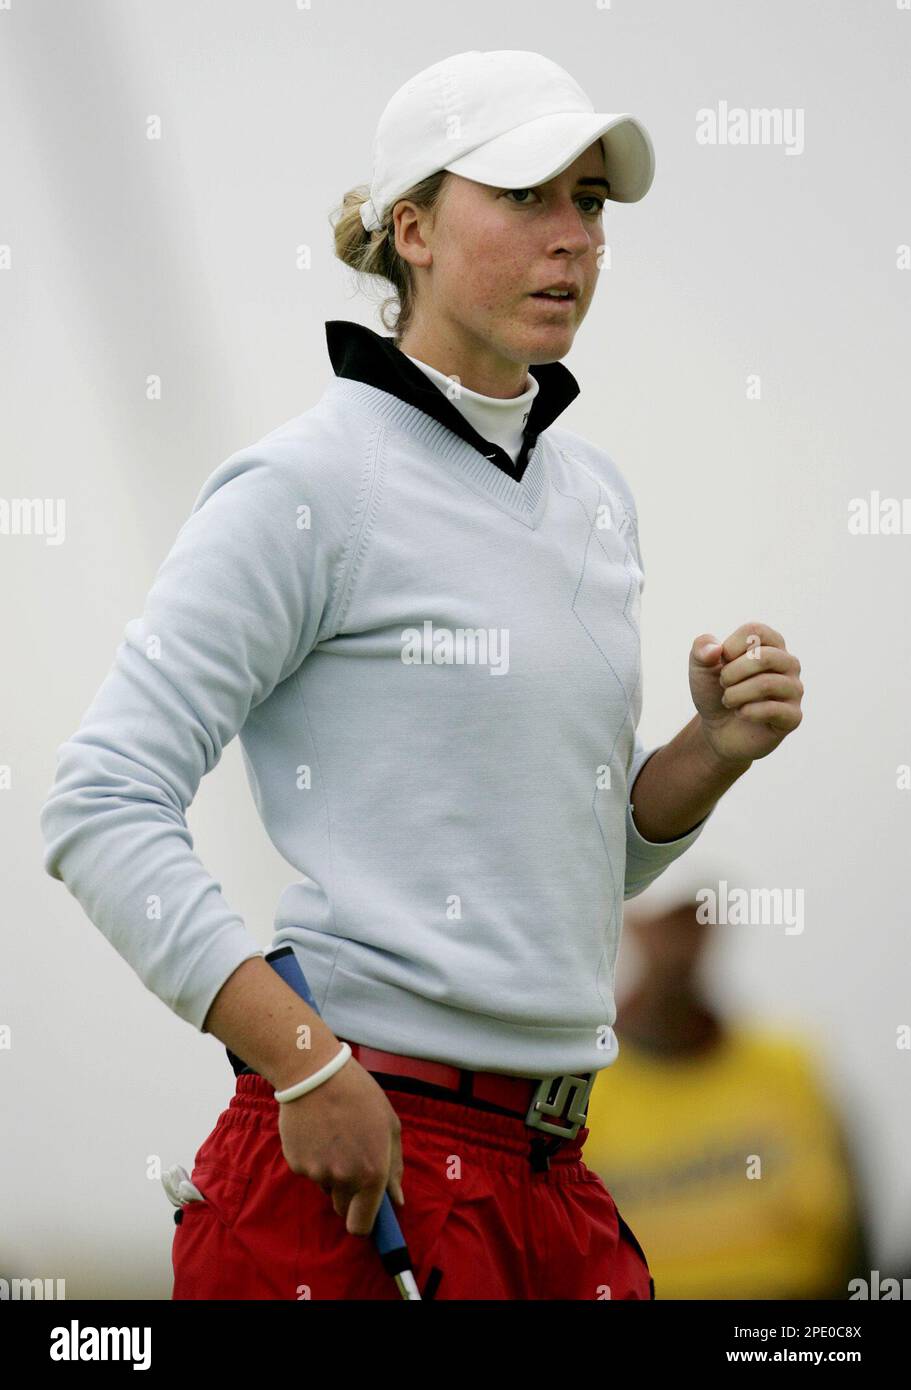 Amateur player, Swedens Louise Stahle clenches her fist in celebration after putting on the 14th green, on the second day of the Womens British Open golf tournament at the Royal Birkdale course